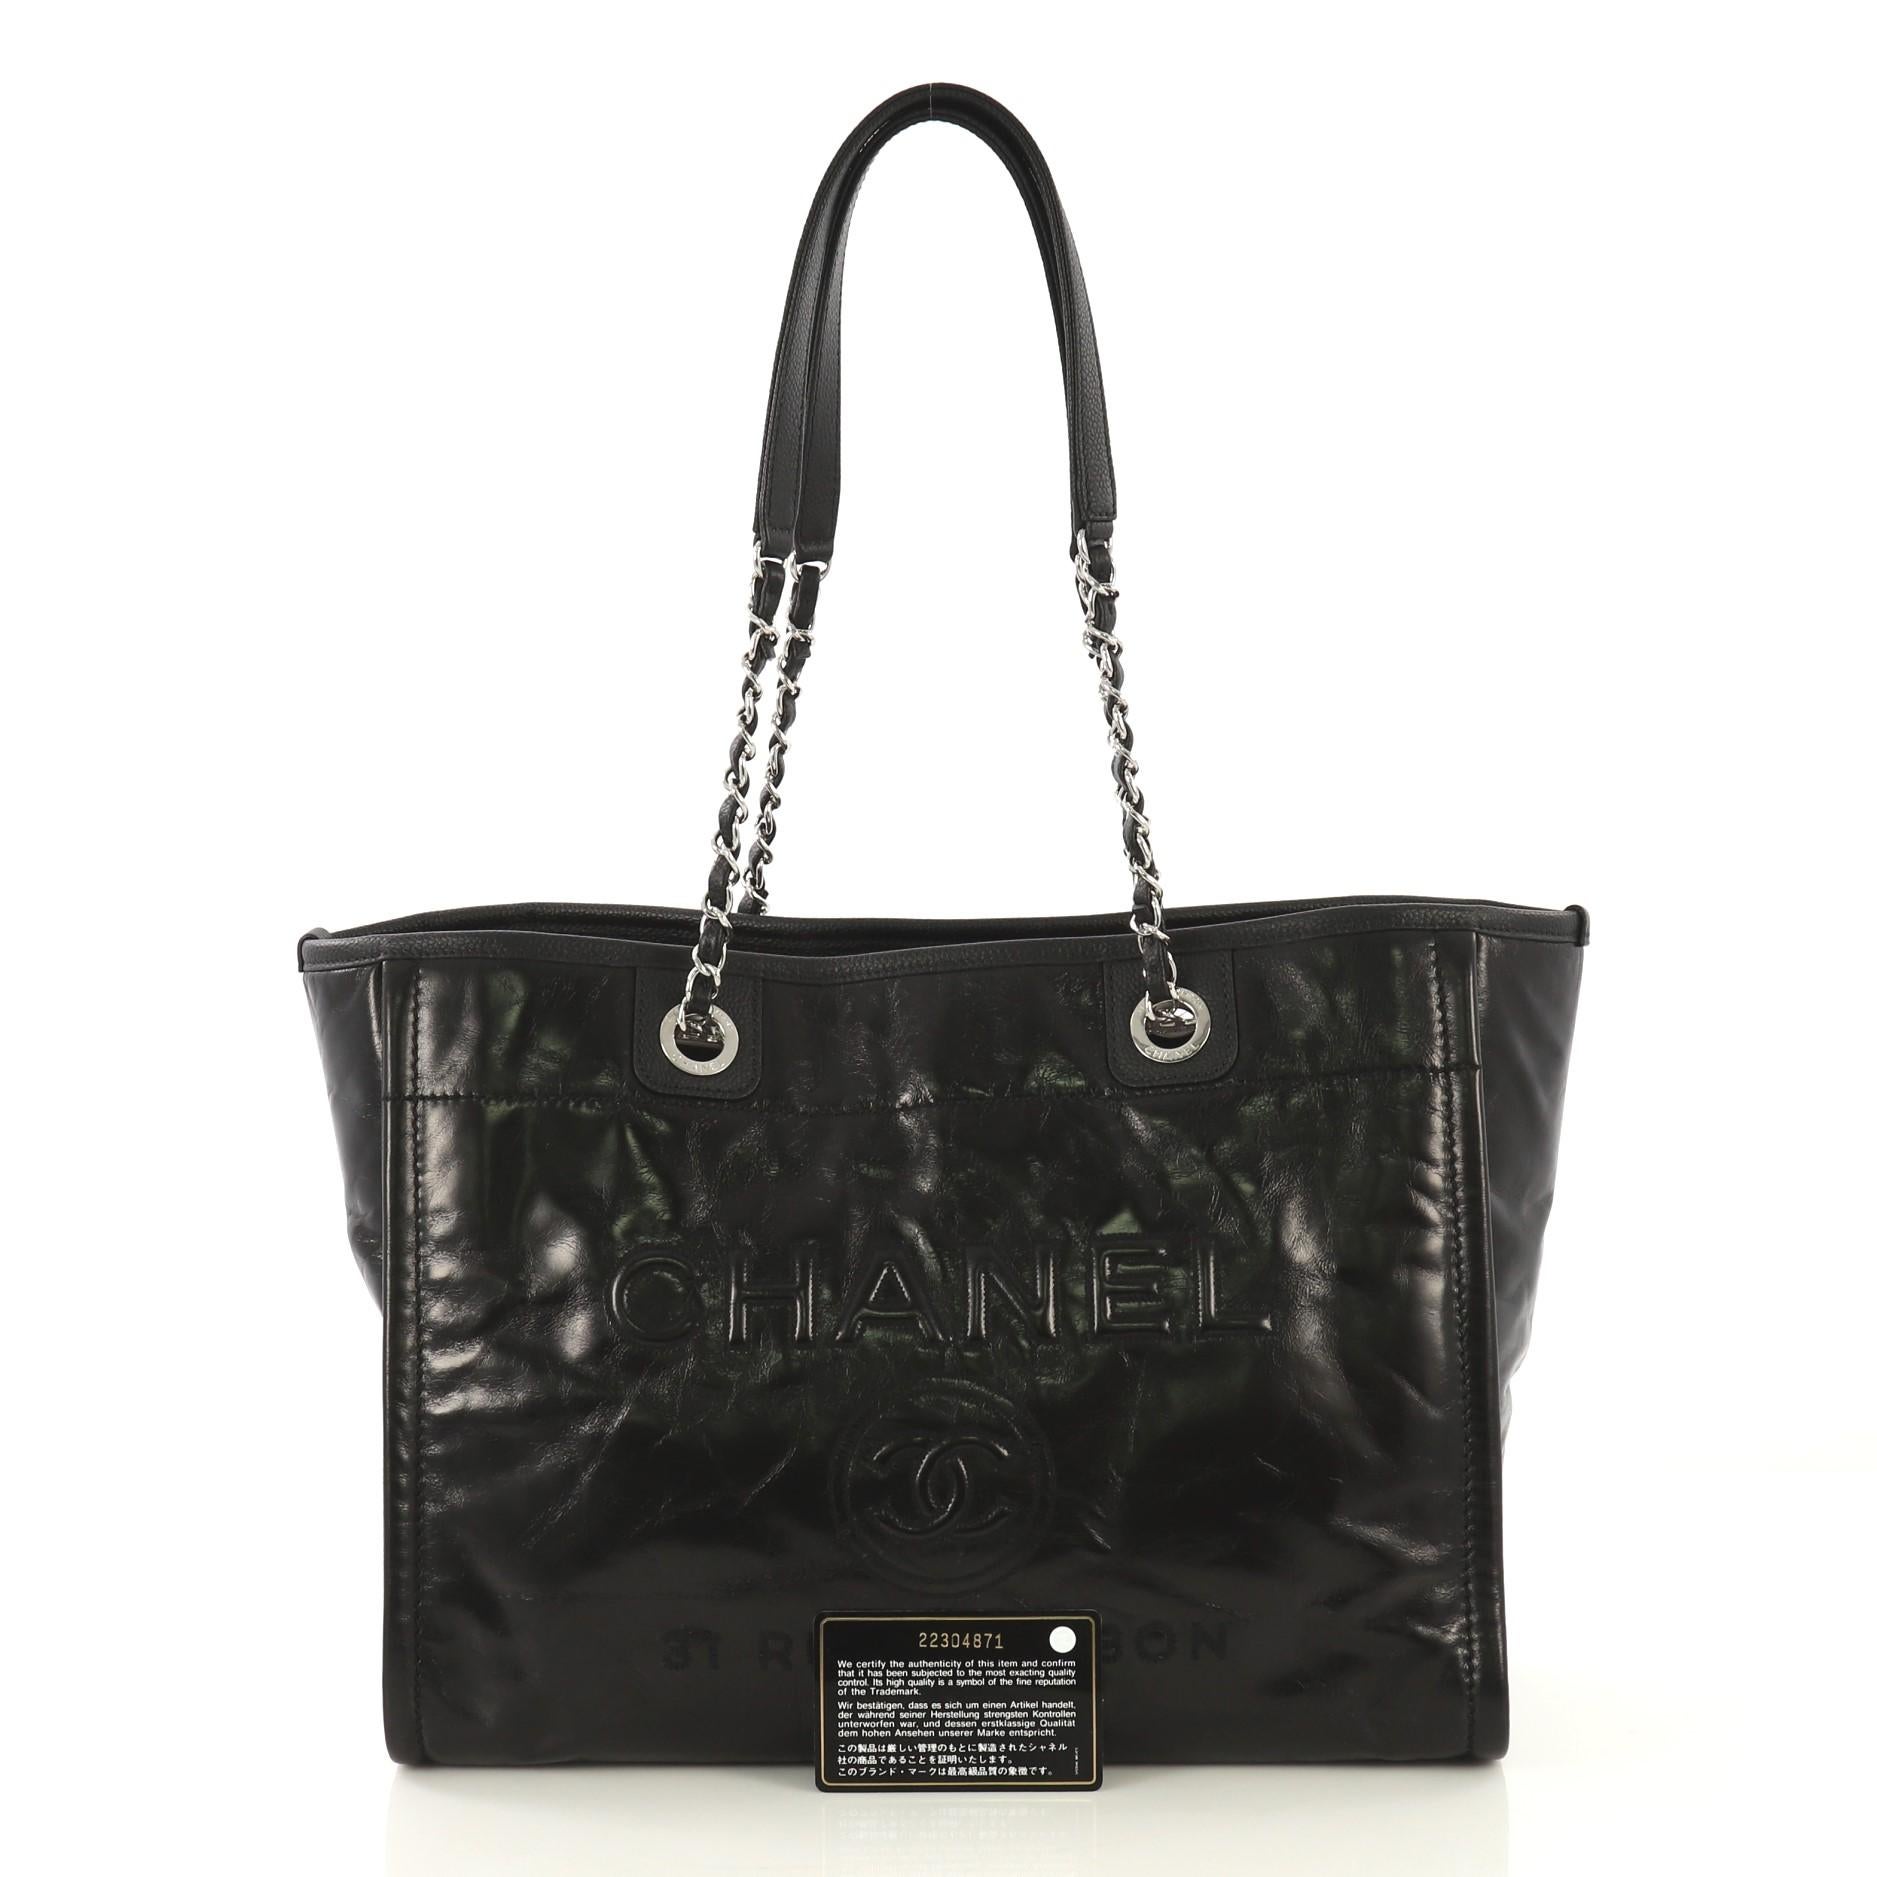 This Chanel Deauville Tote Glazed Calfskin Small, crafted in black glazed calfskin leather, features woven-in chain link straps, CC logo with Chanel's famous Parisian store address, quilted exterior back pocket, and silver-tone hardware. Its